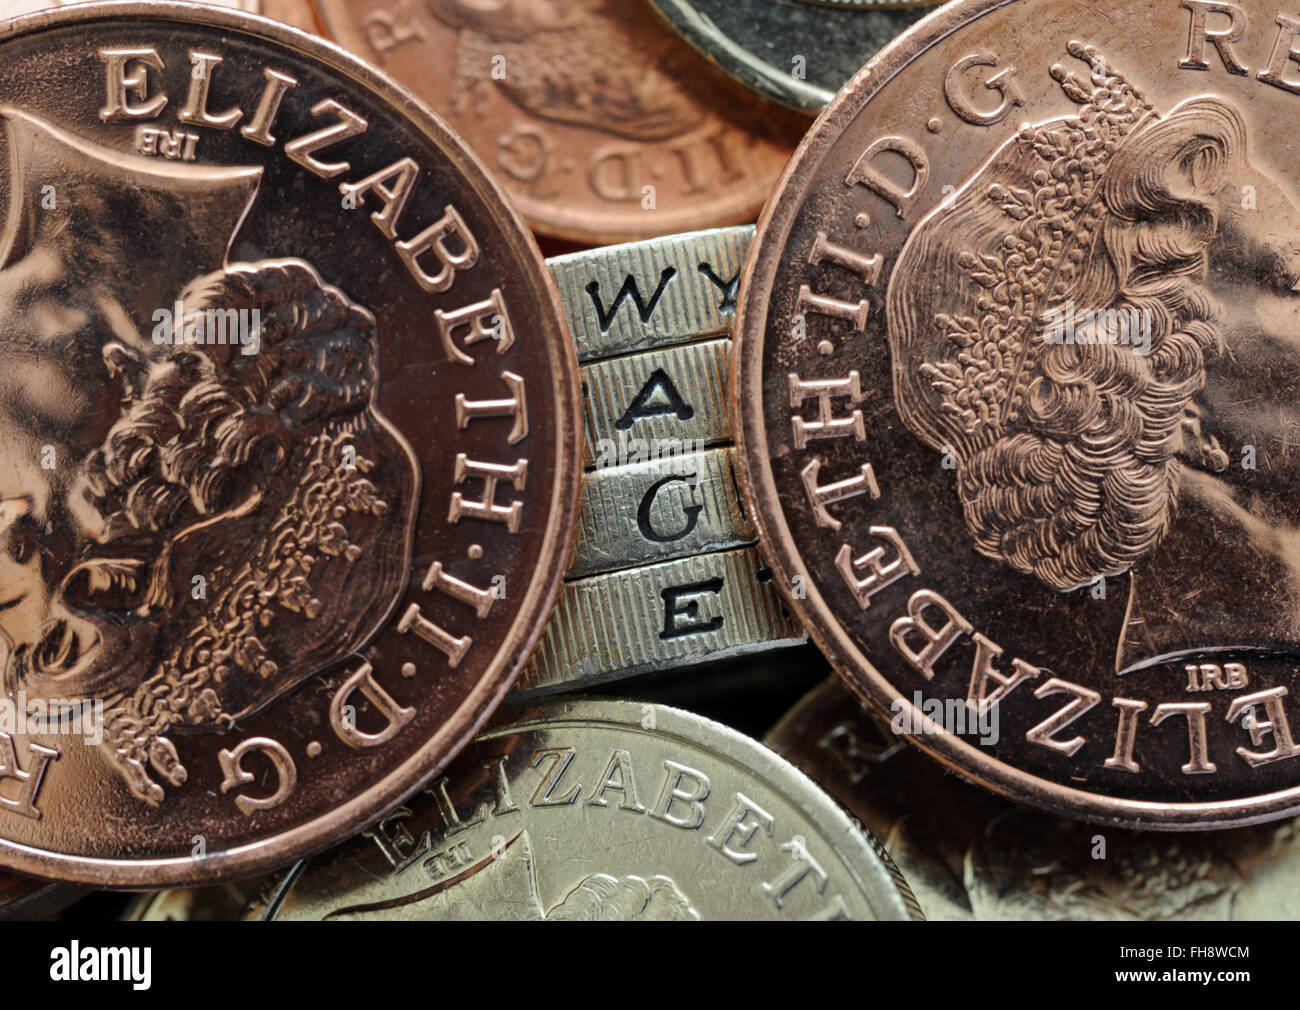 ONE POUND COINS EDGE LETTERS READING THE WORD 'WAGE'  WITH COINS RE THE NATIONAL LIVING WAGE WAGES INCOMES WORKERS JOB JOBS UK Stock Photo